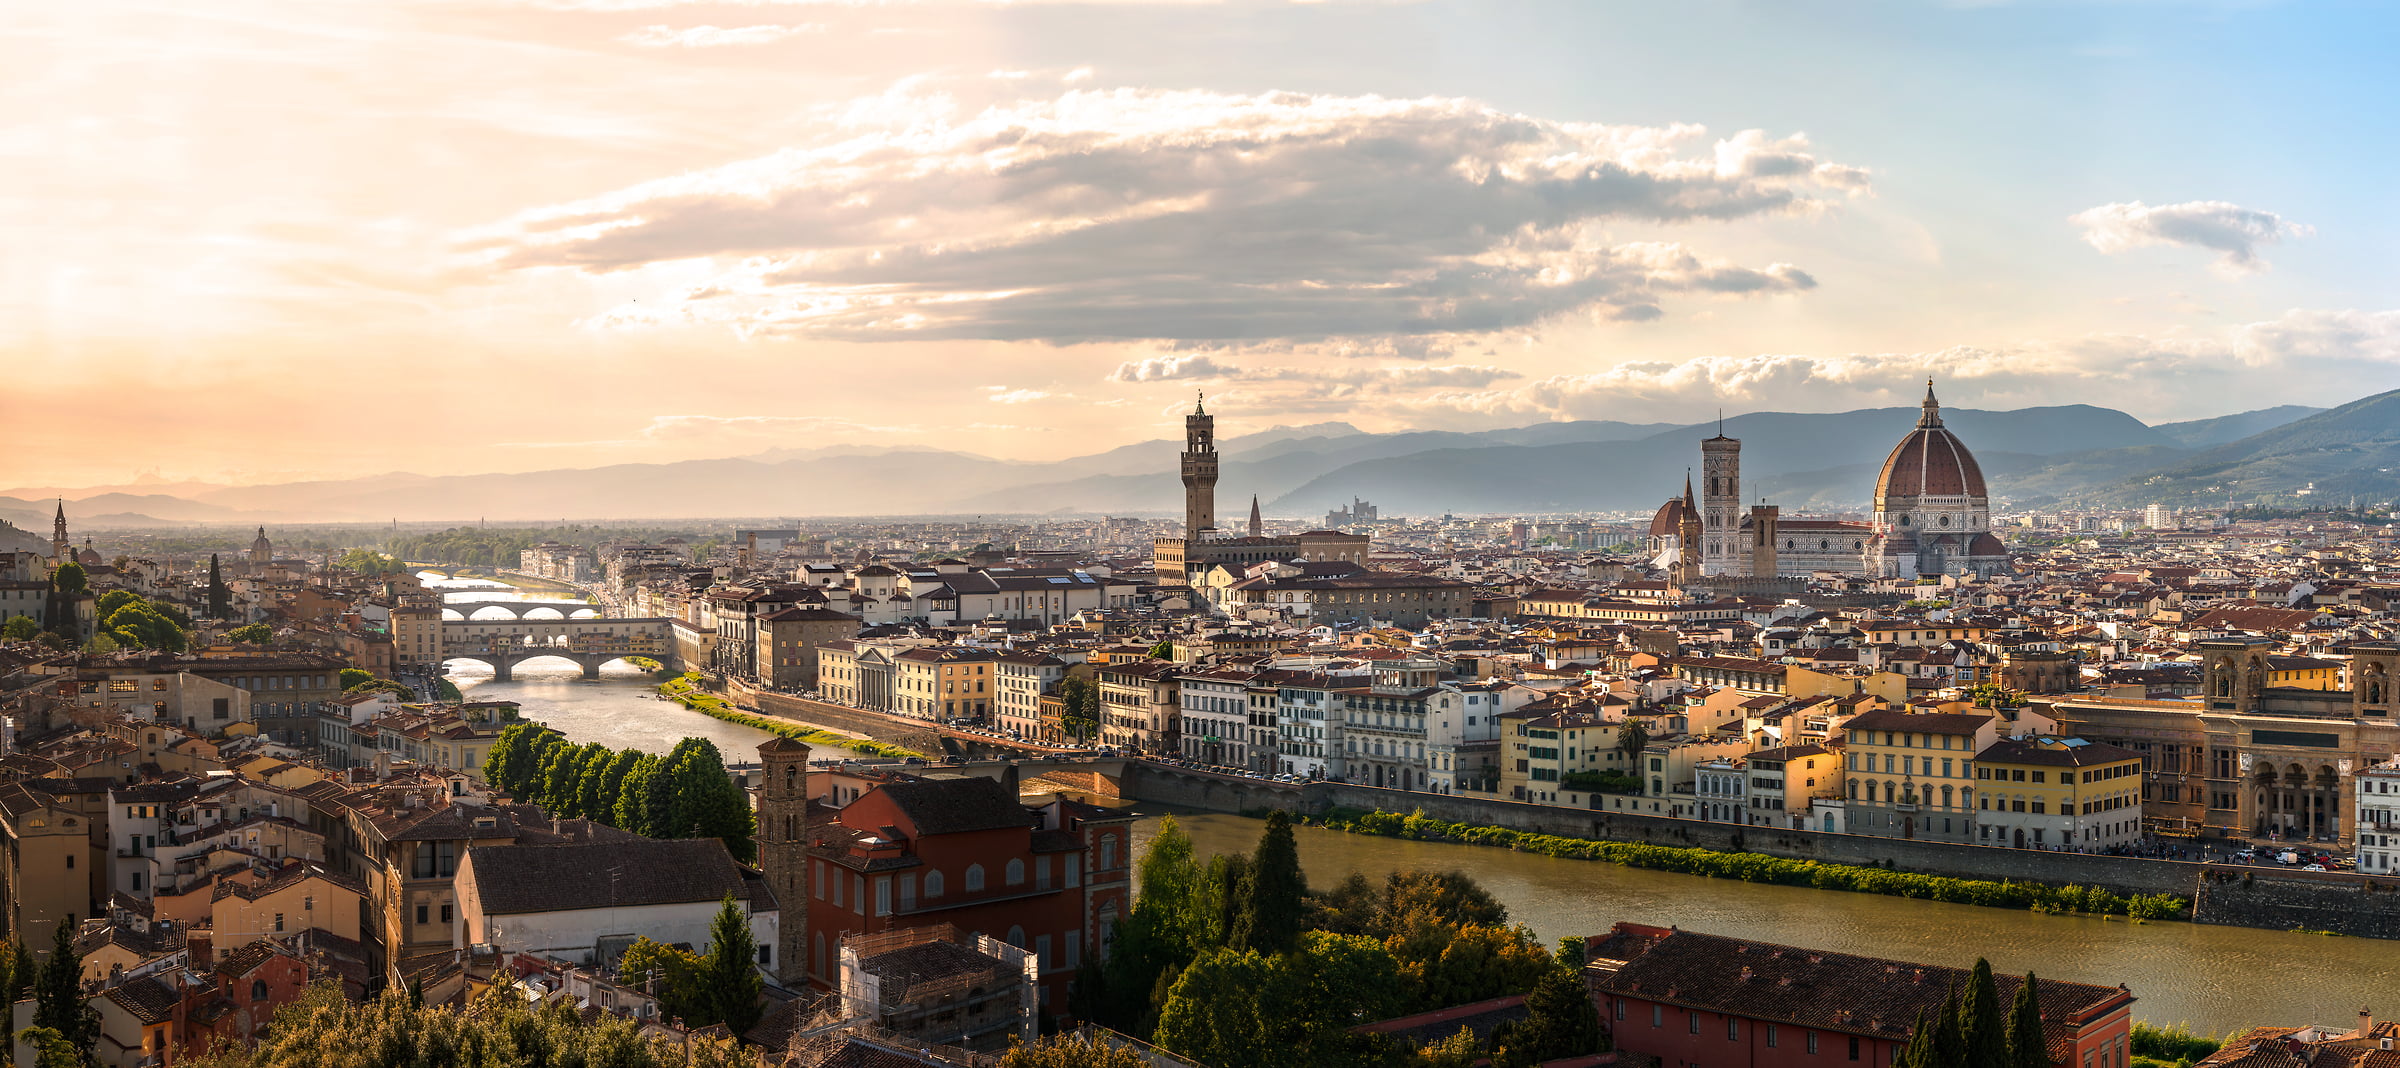 666 megapixels! A very high resolution, large-format VAST photo print of Florence, Italy at Sunset with the Cathedral of Santa Maria del Fiore, The Palazzo Vecchio, and the Arno river; fine art cityscape landscape photograph created by Justin Katz in Florence, Tuscany, Italy.